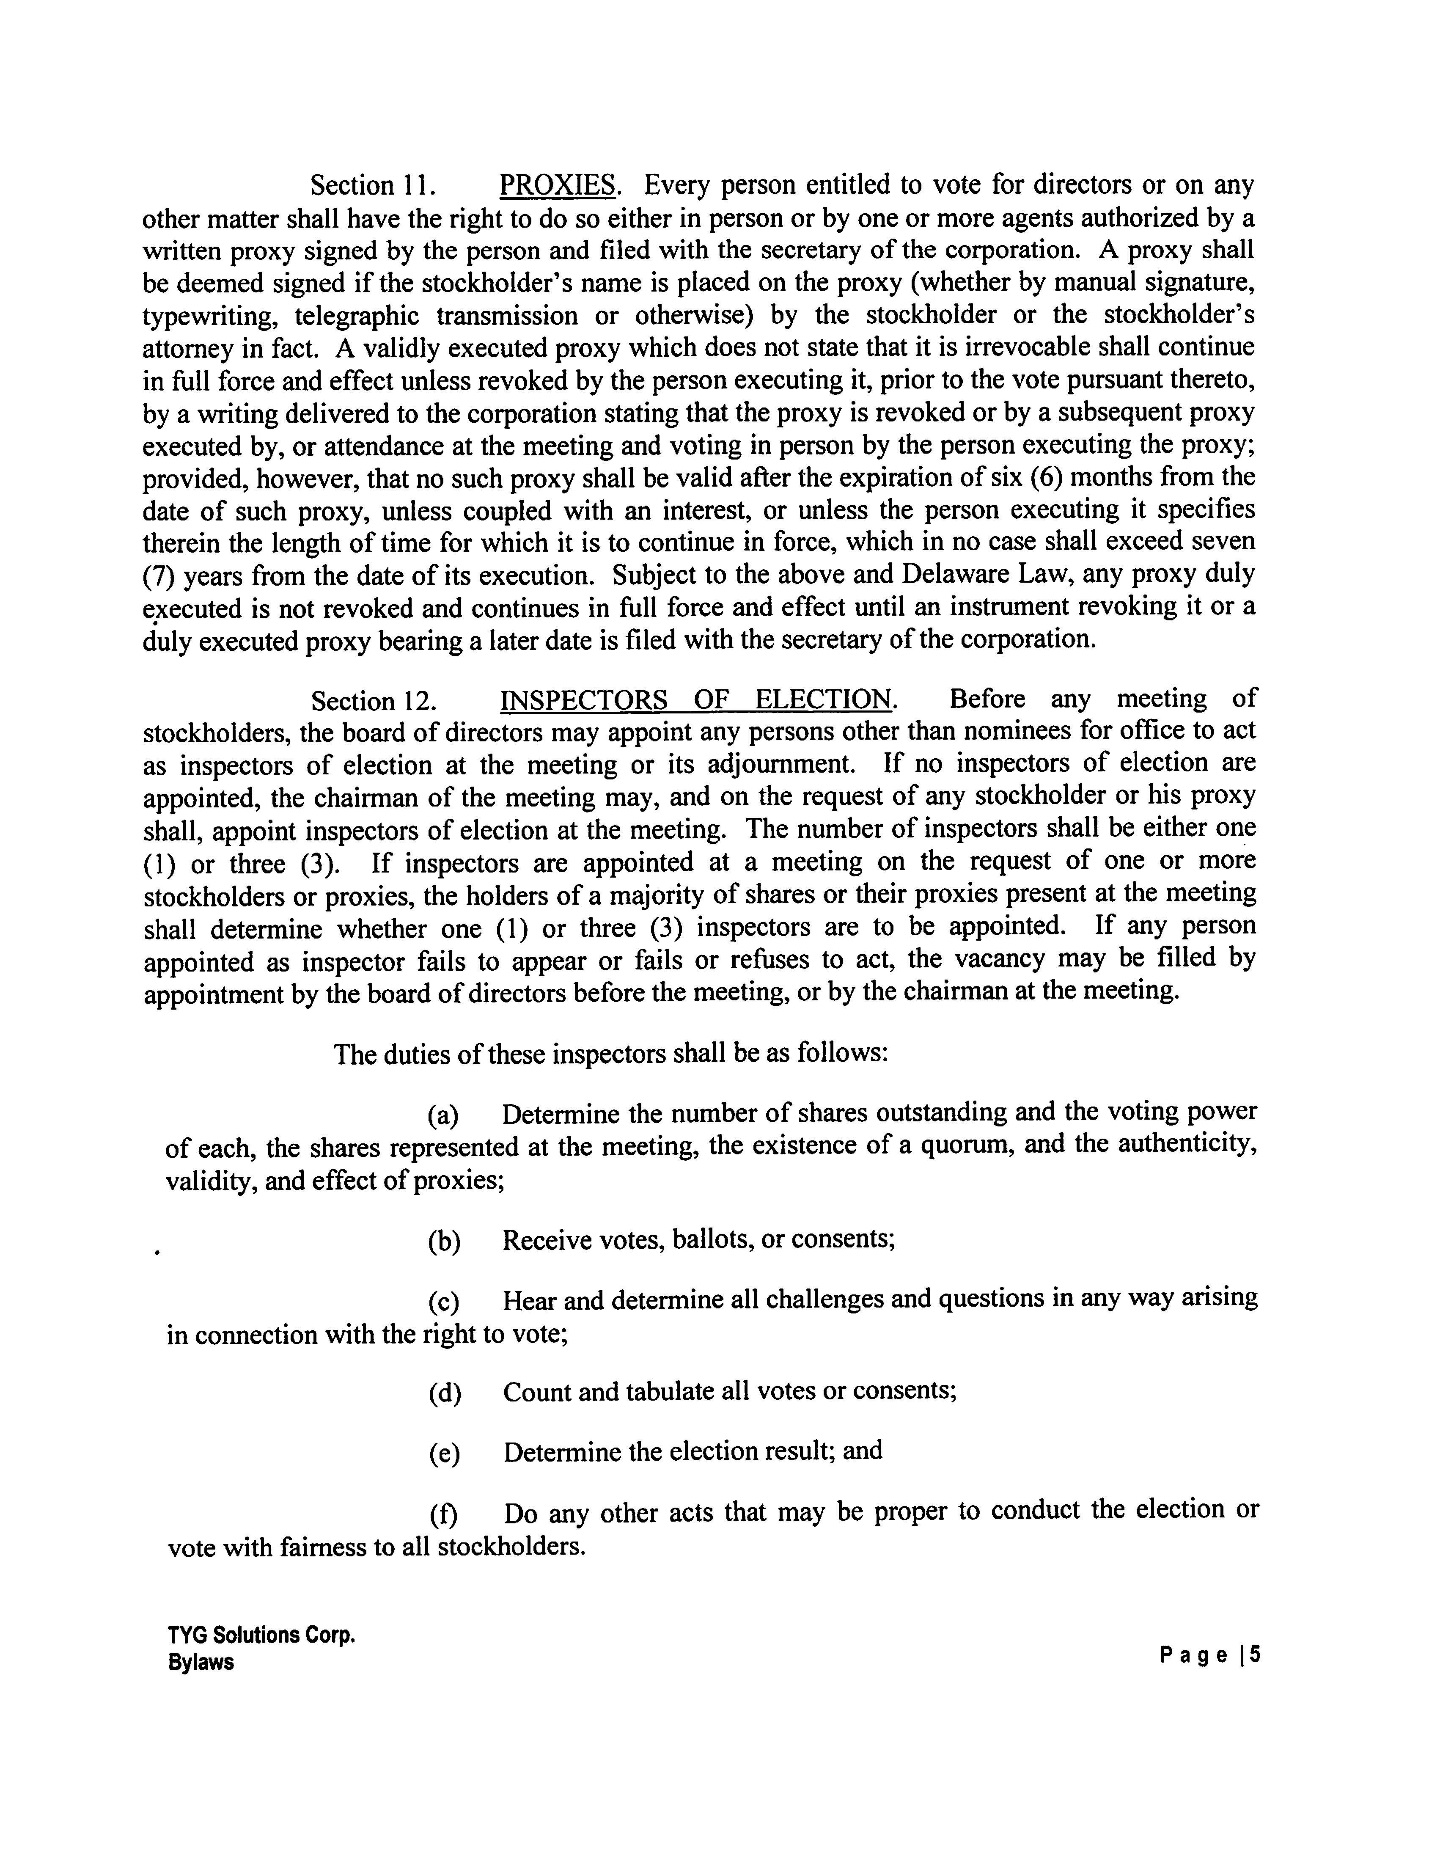 Ex. 3.3 Amended Articles and Bylaws_Page_05.jpg